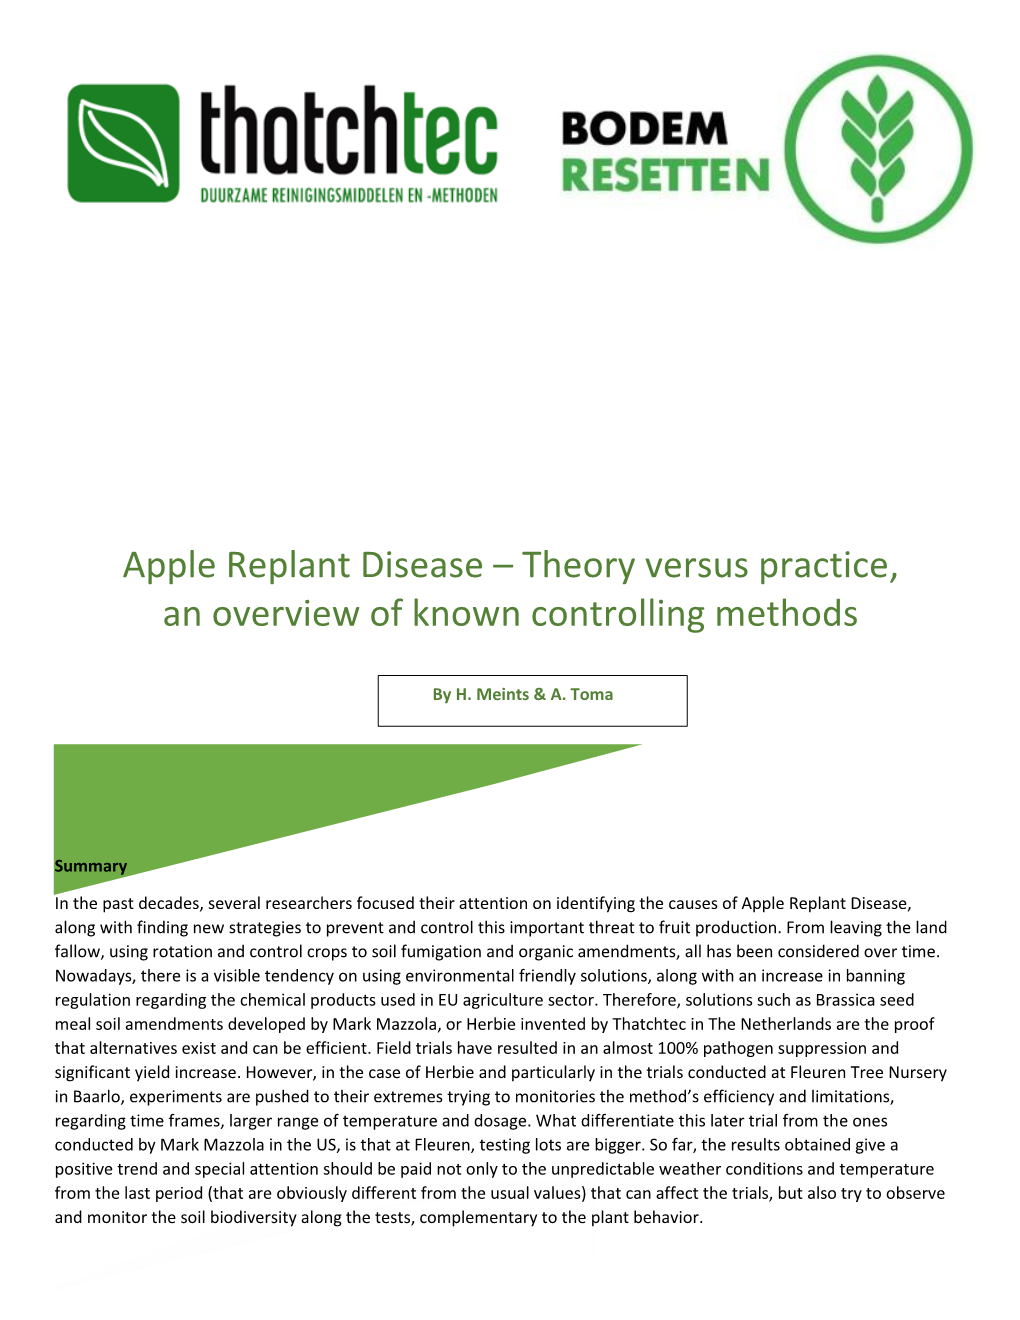 Apple Replant Disease – Theory Versus Practice, an Overview of Known Controlling Methods